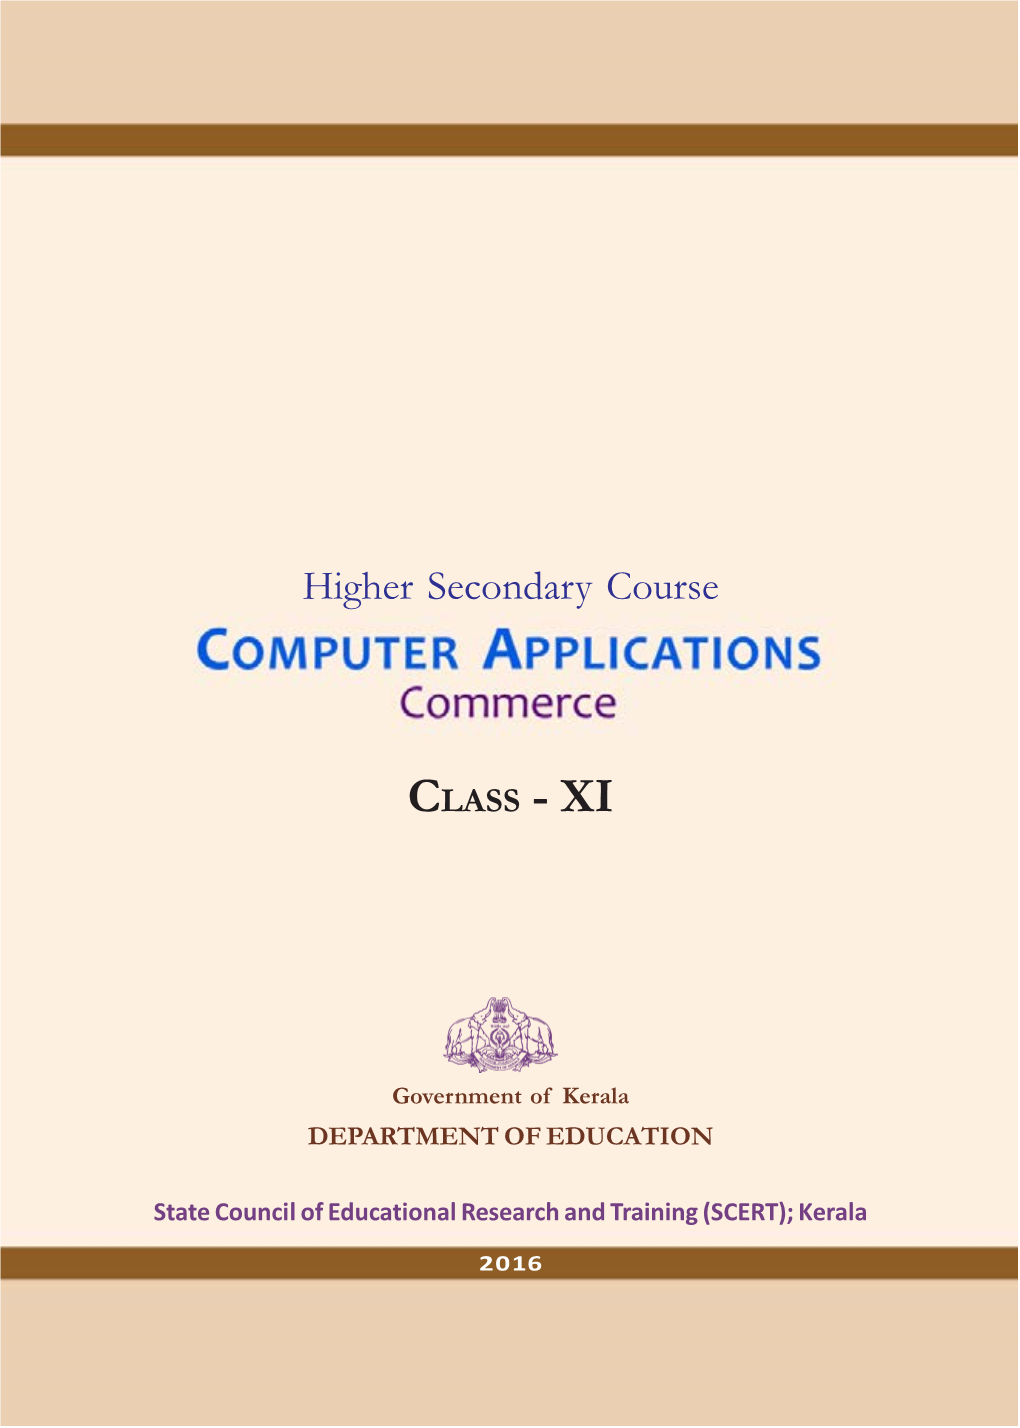 Higher Secondary Course